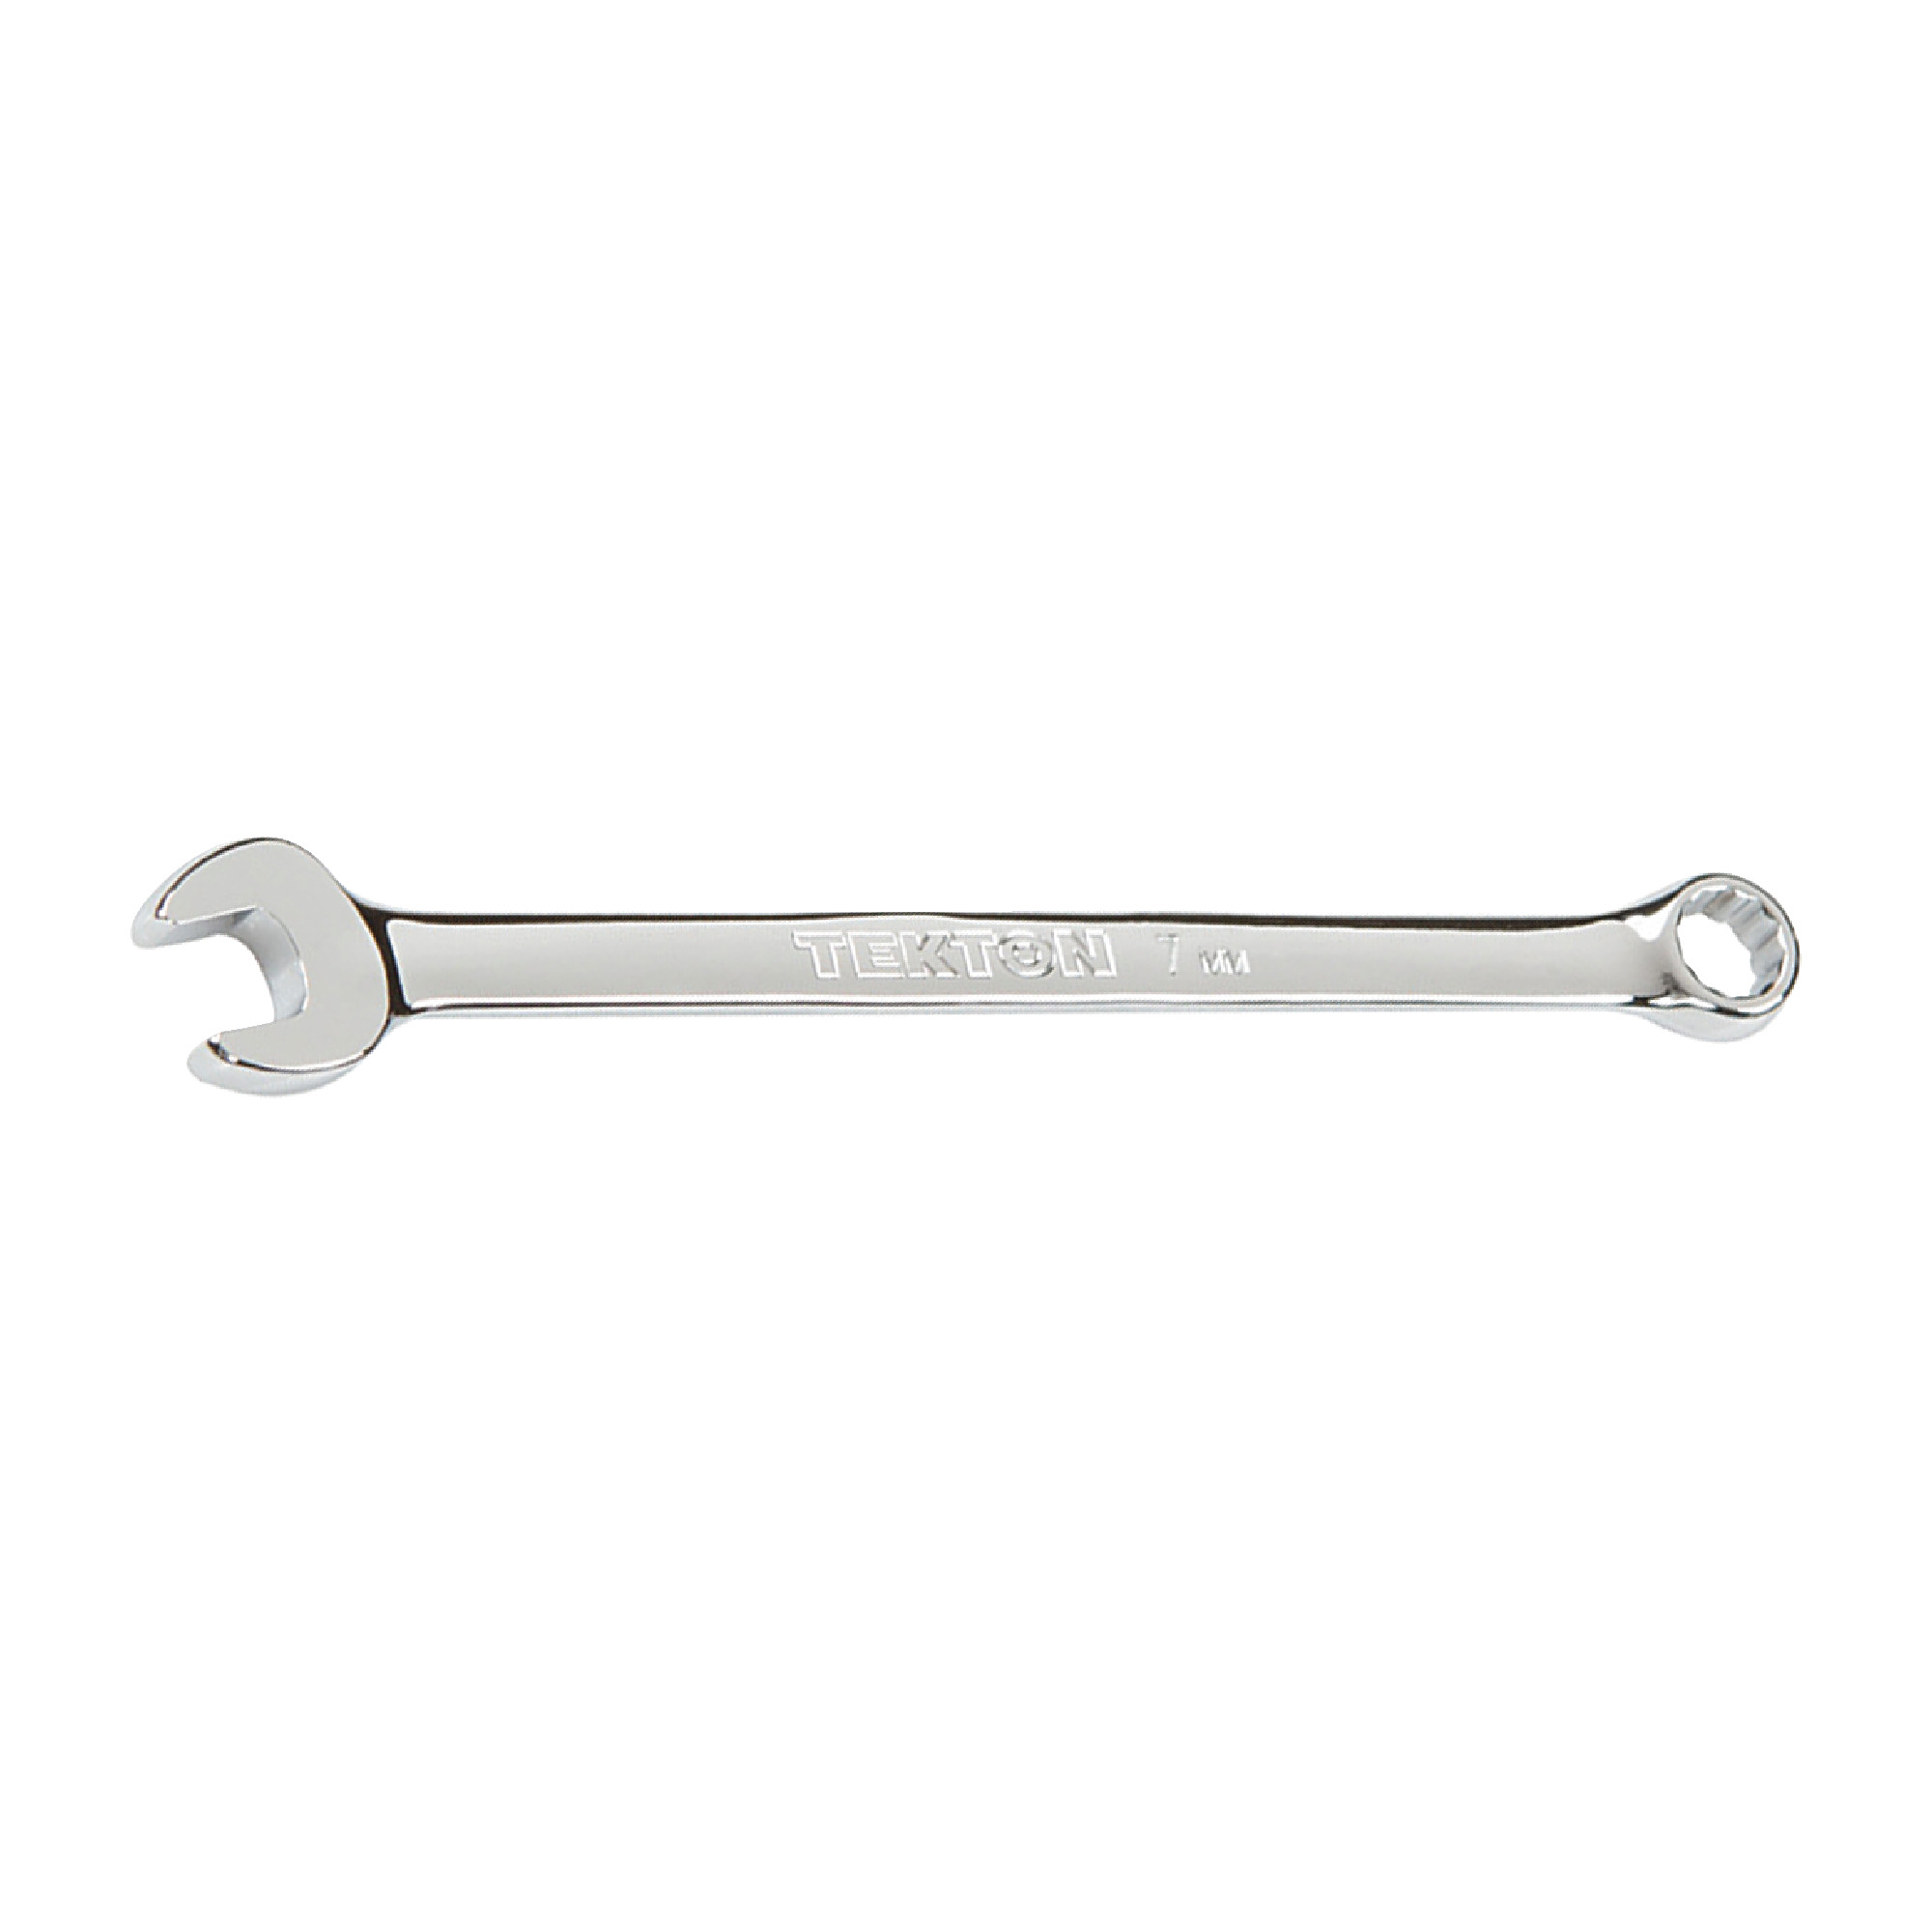 Mirror Chrome Plated 7mm Metric Combination Wrench